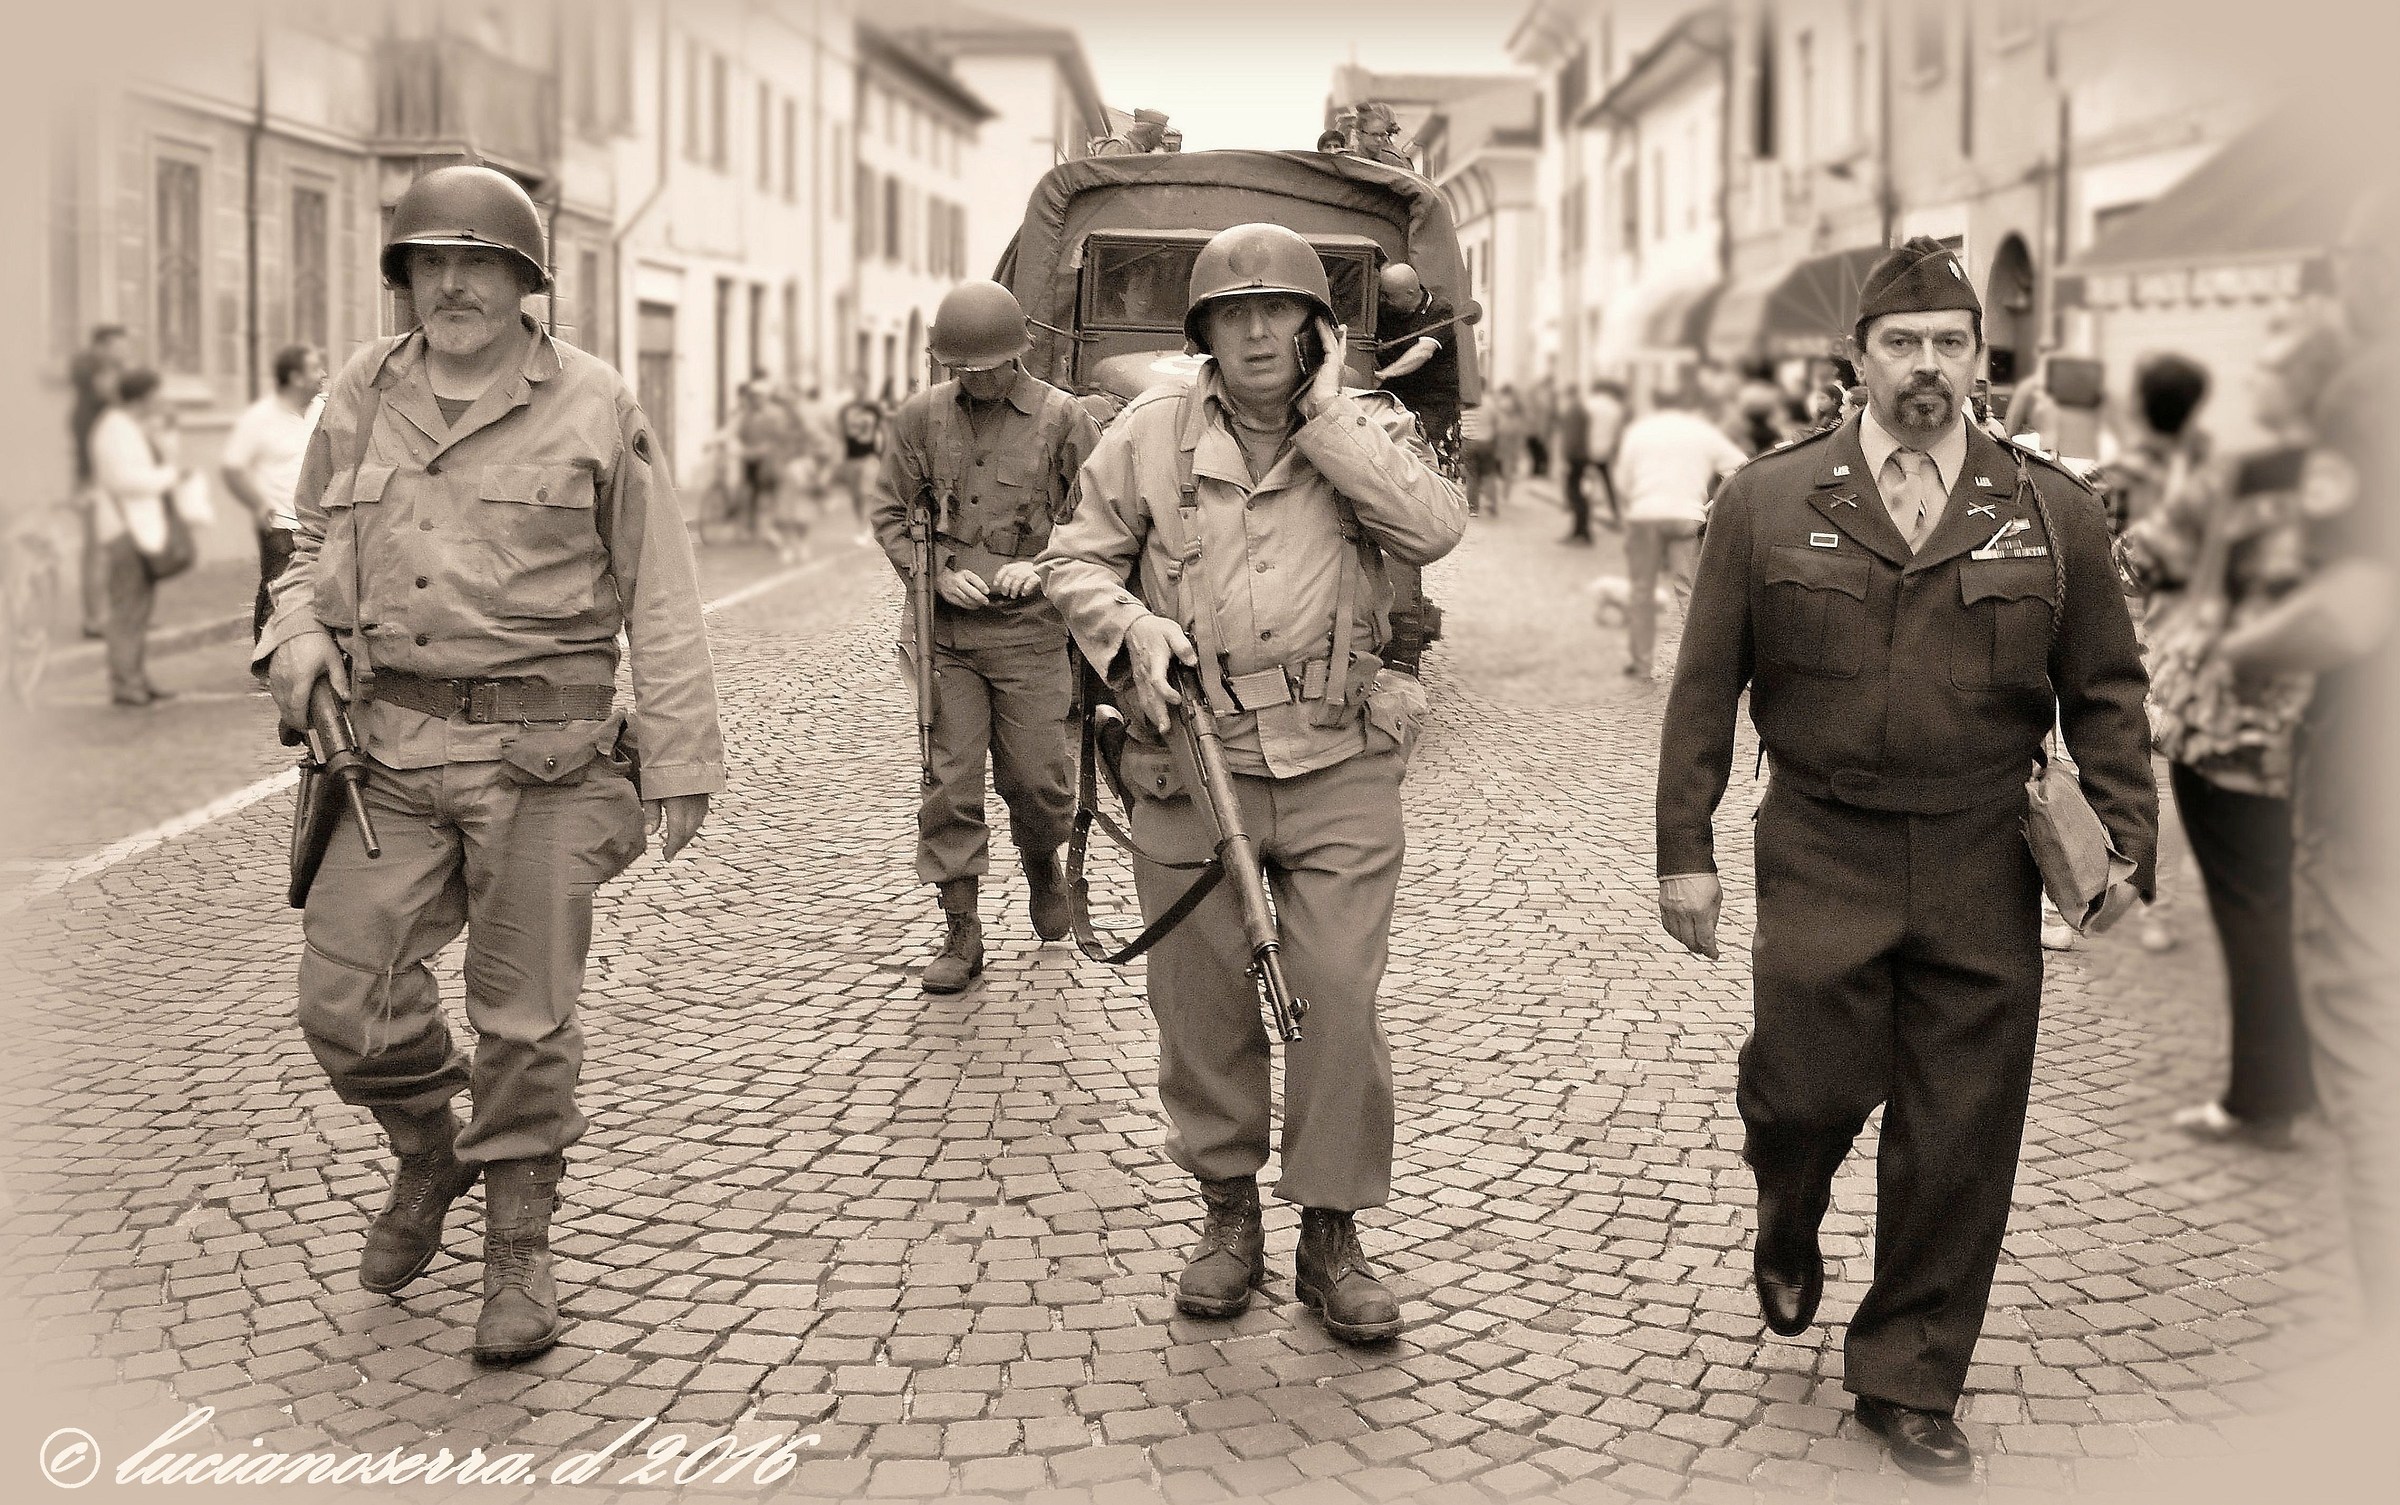 Appearing with military uniforms of the World War II...